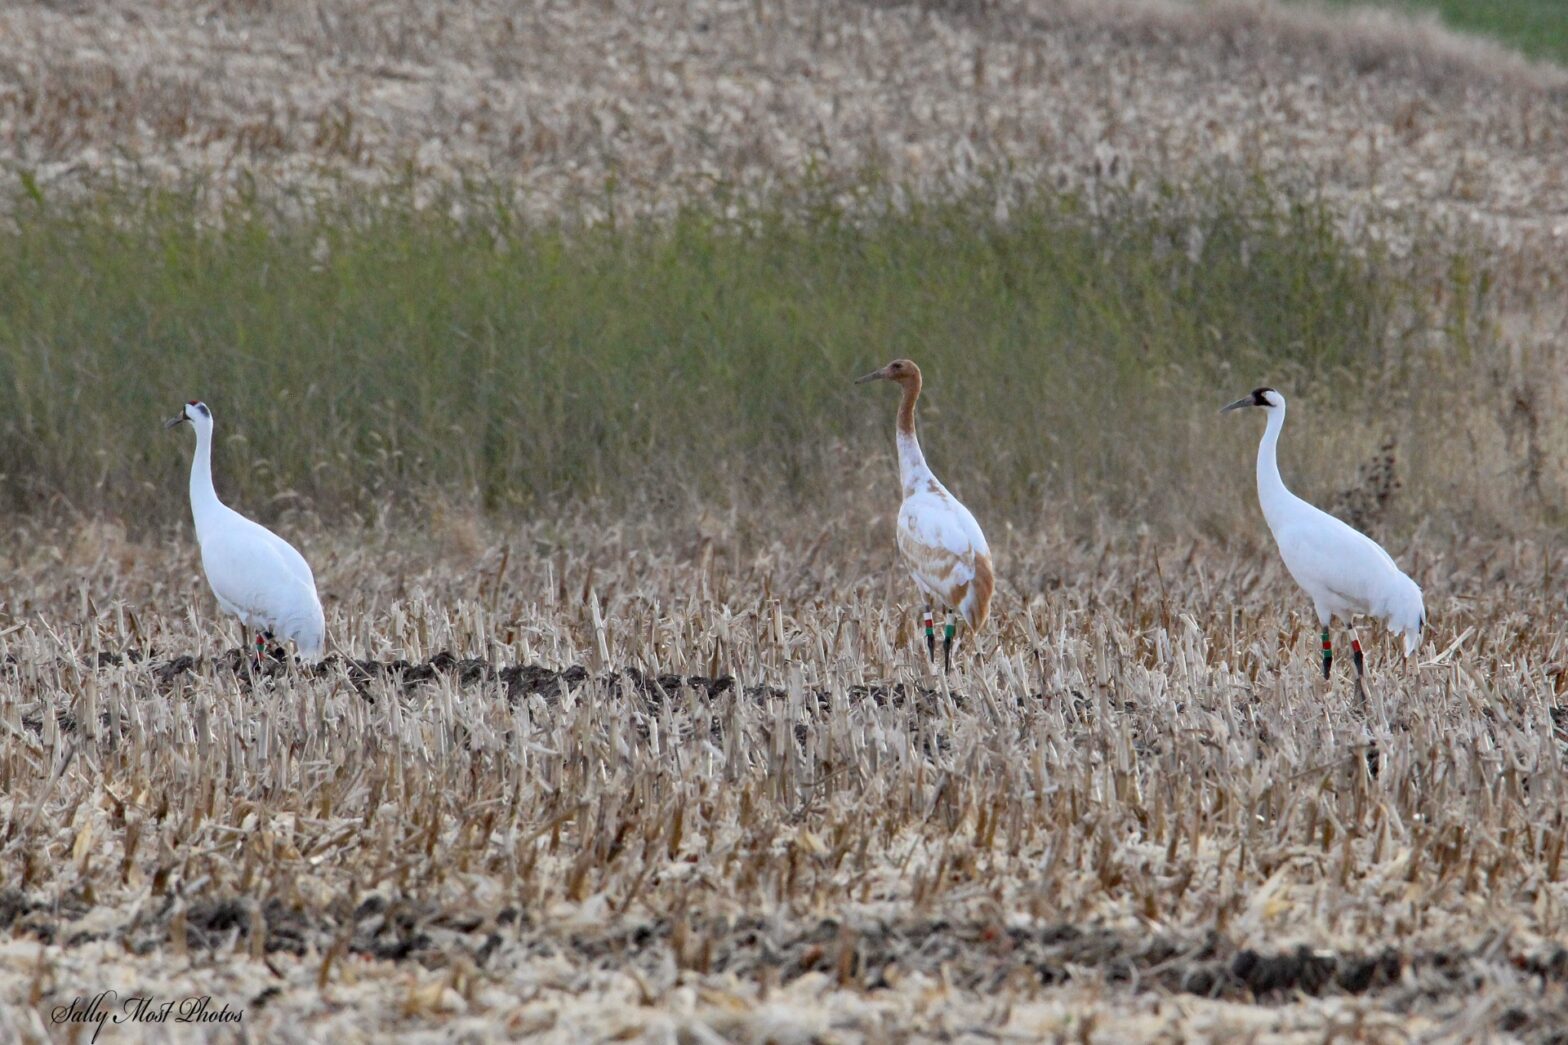 Two adult cranes stand in a harvested corn field with their chick between them. The chick is almost adult size but has cinnamon brown plumage on its head and neck.